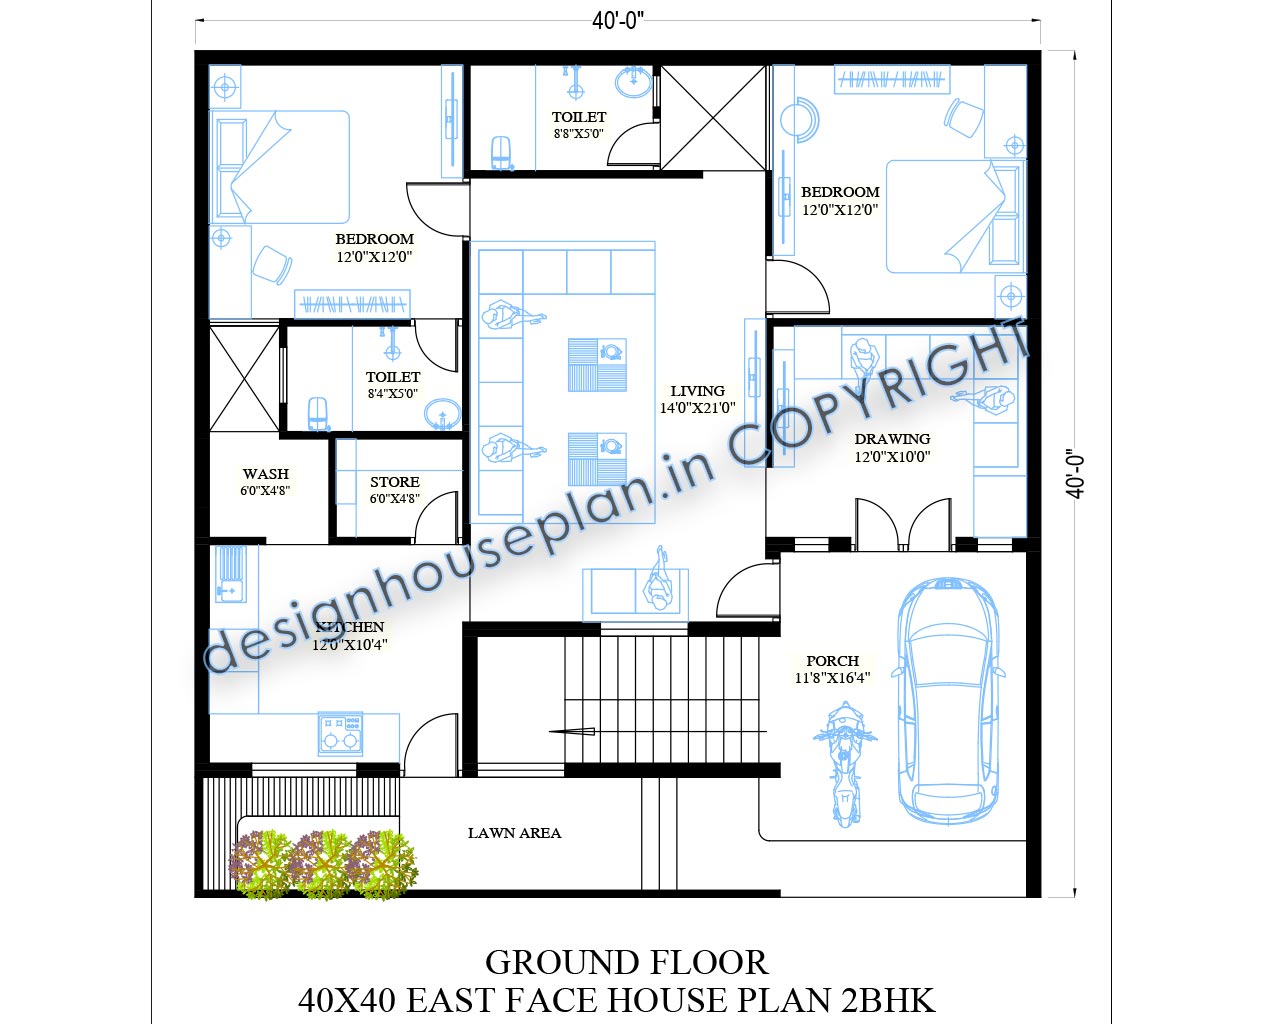 This is an east facing 2bhk ground floor house plan for a 40x40 feet plot.